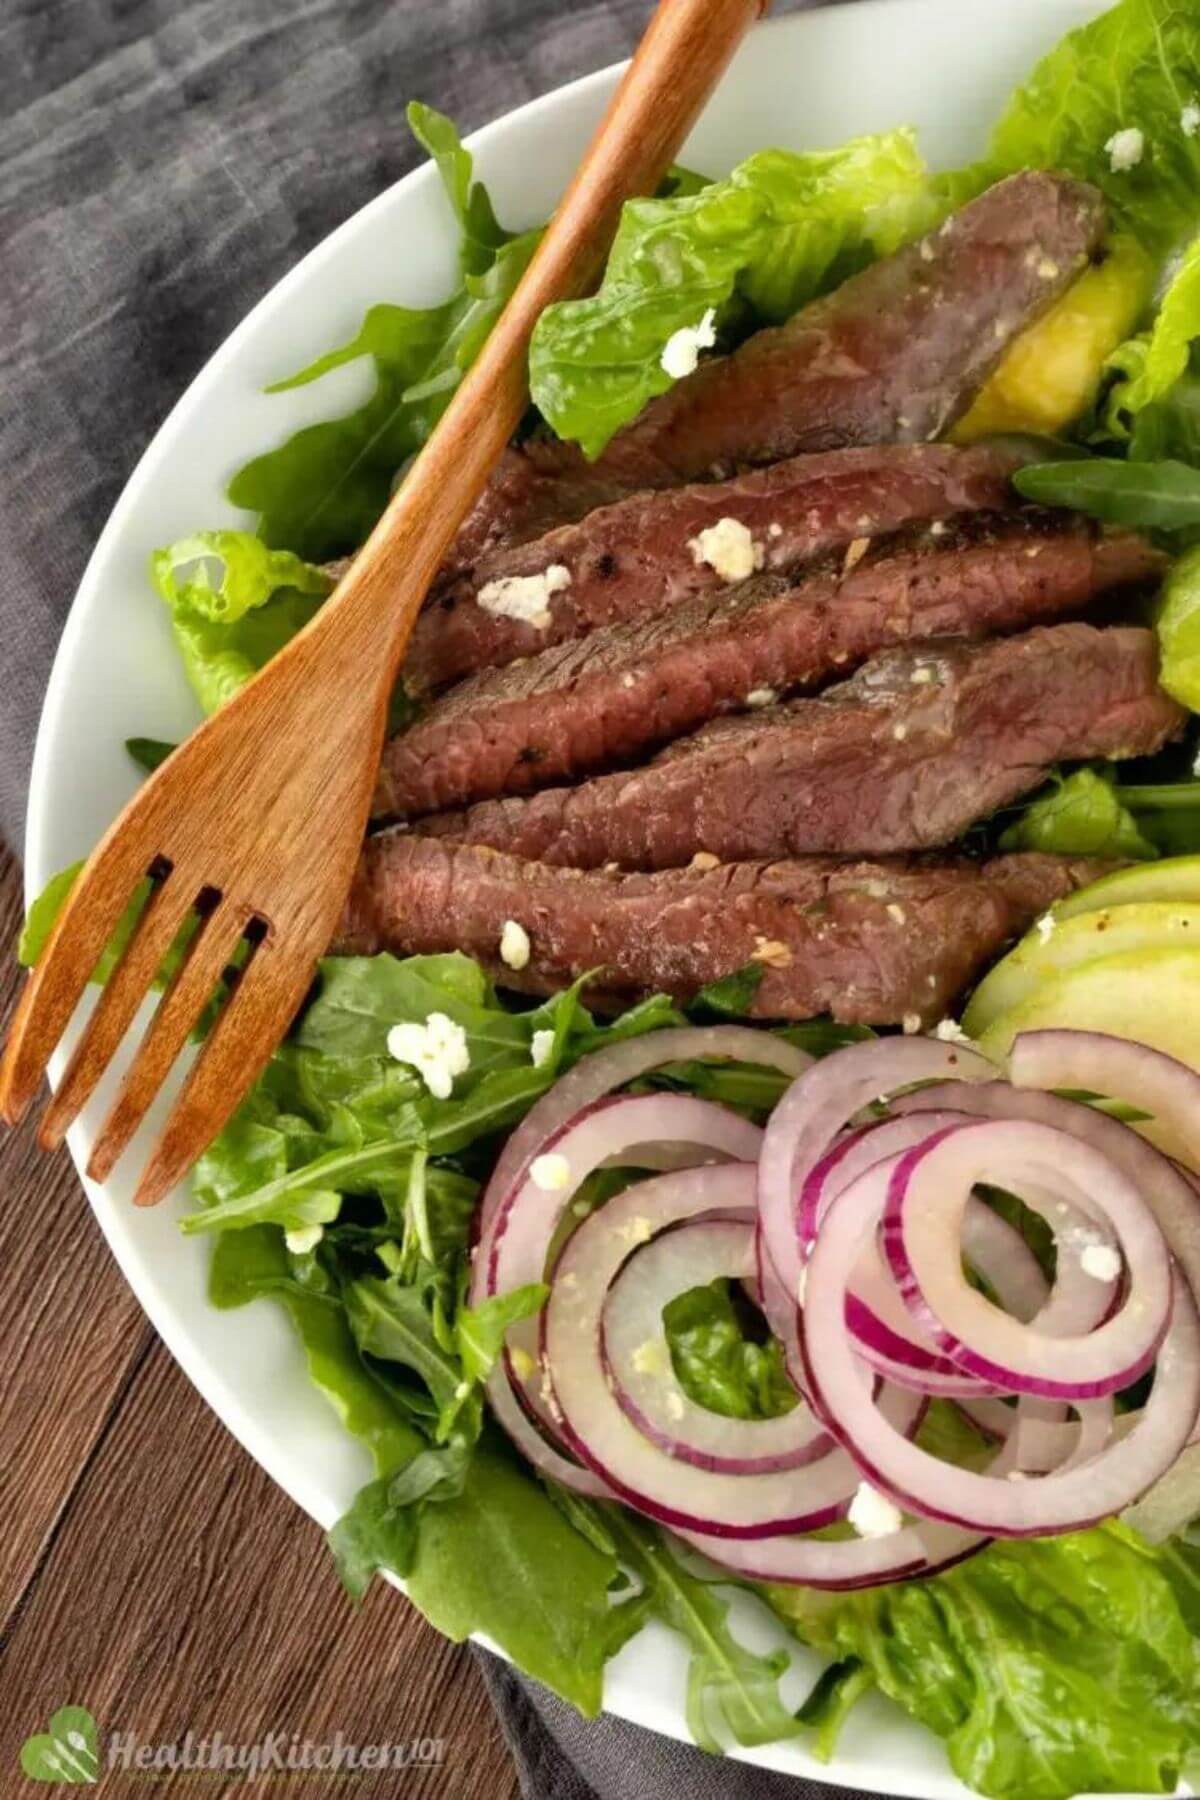 Steak salad using shaved steak for a delicious and healthy meal.